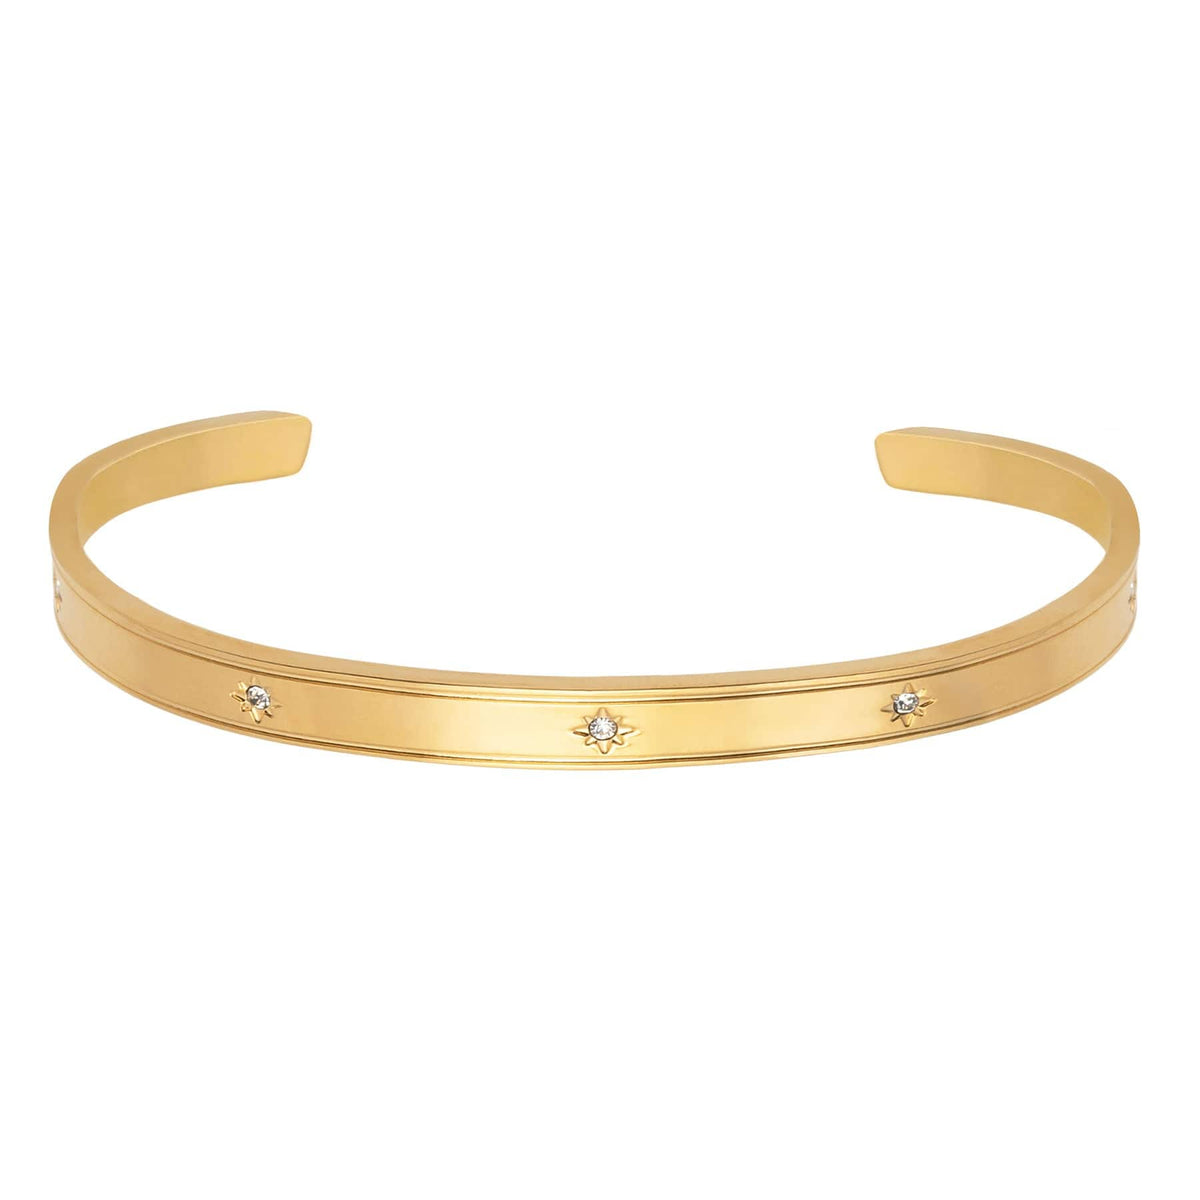 BohoMoon Stainless Steel Astral Cuff Bracelet Gold